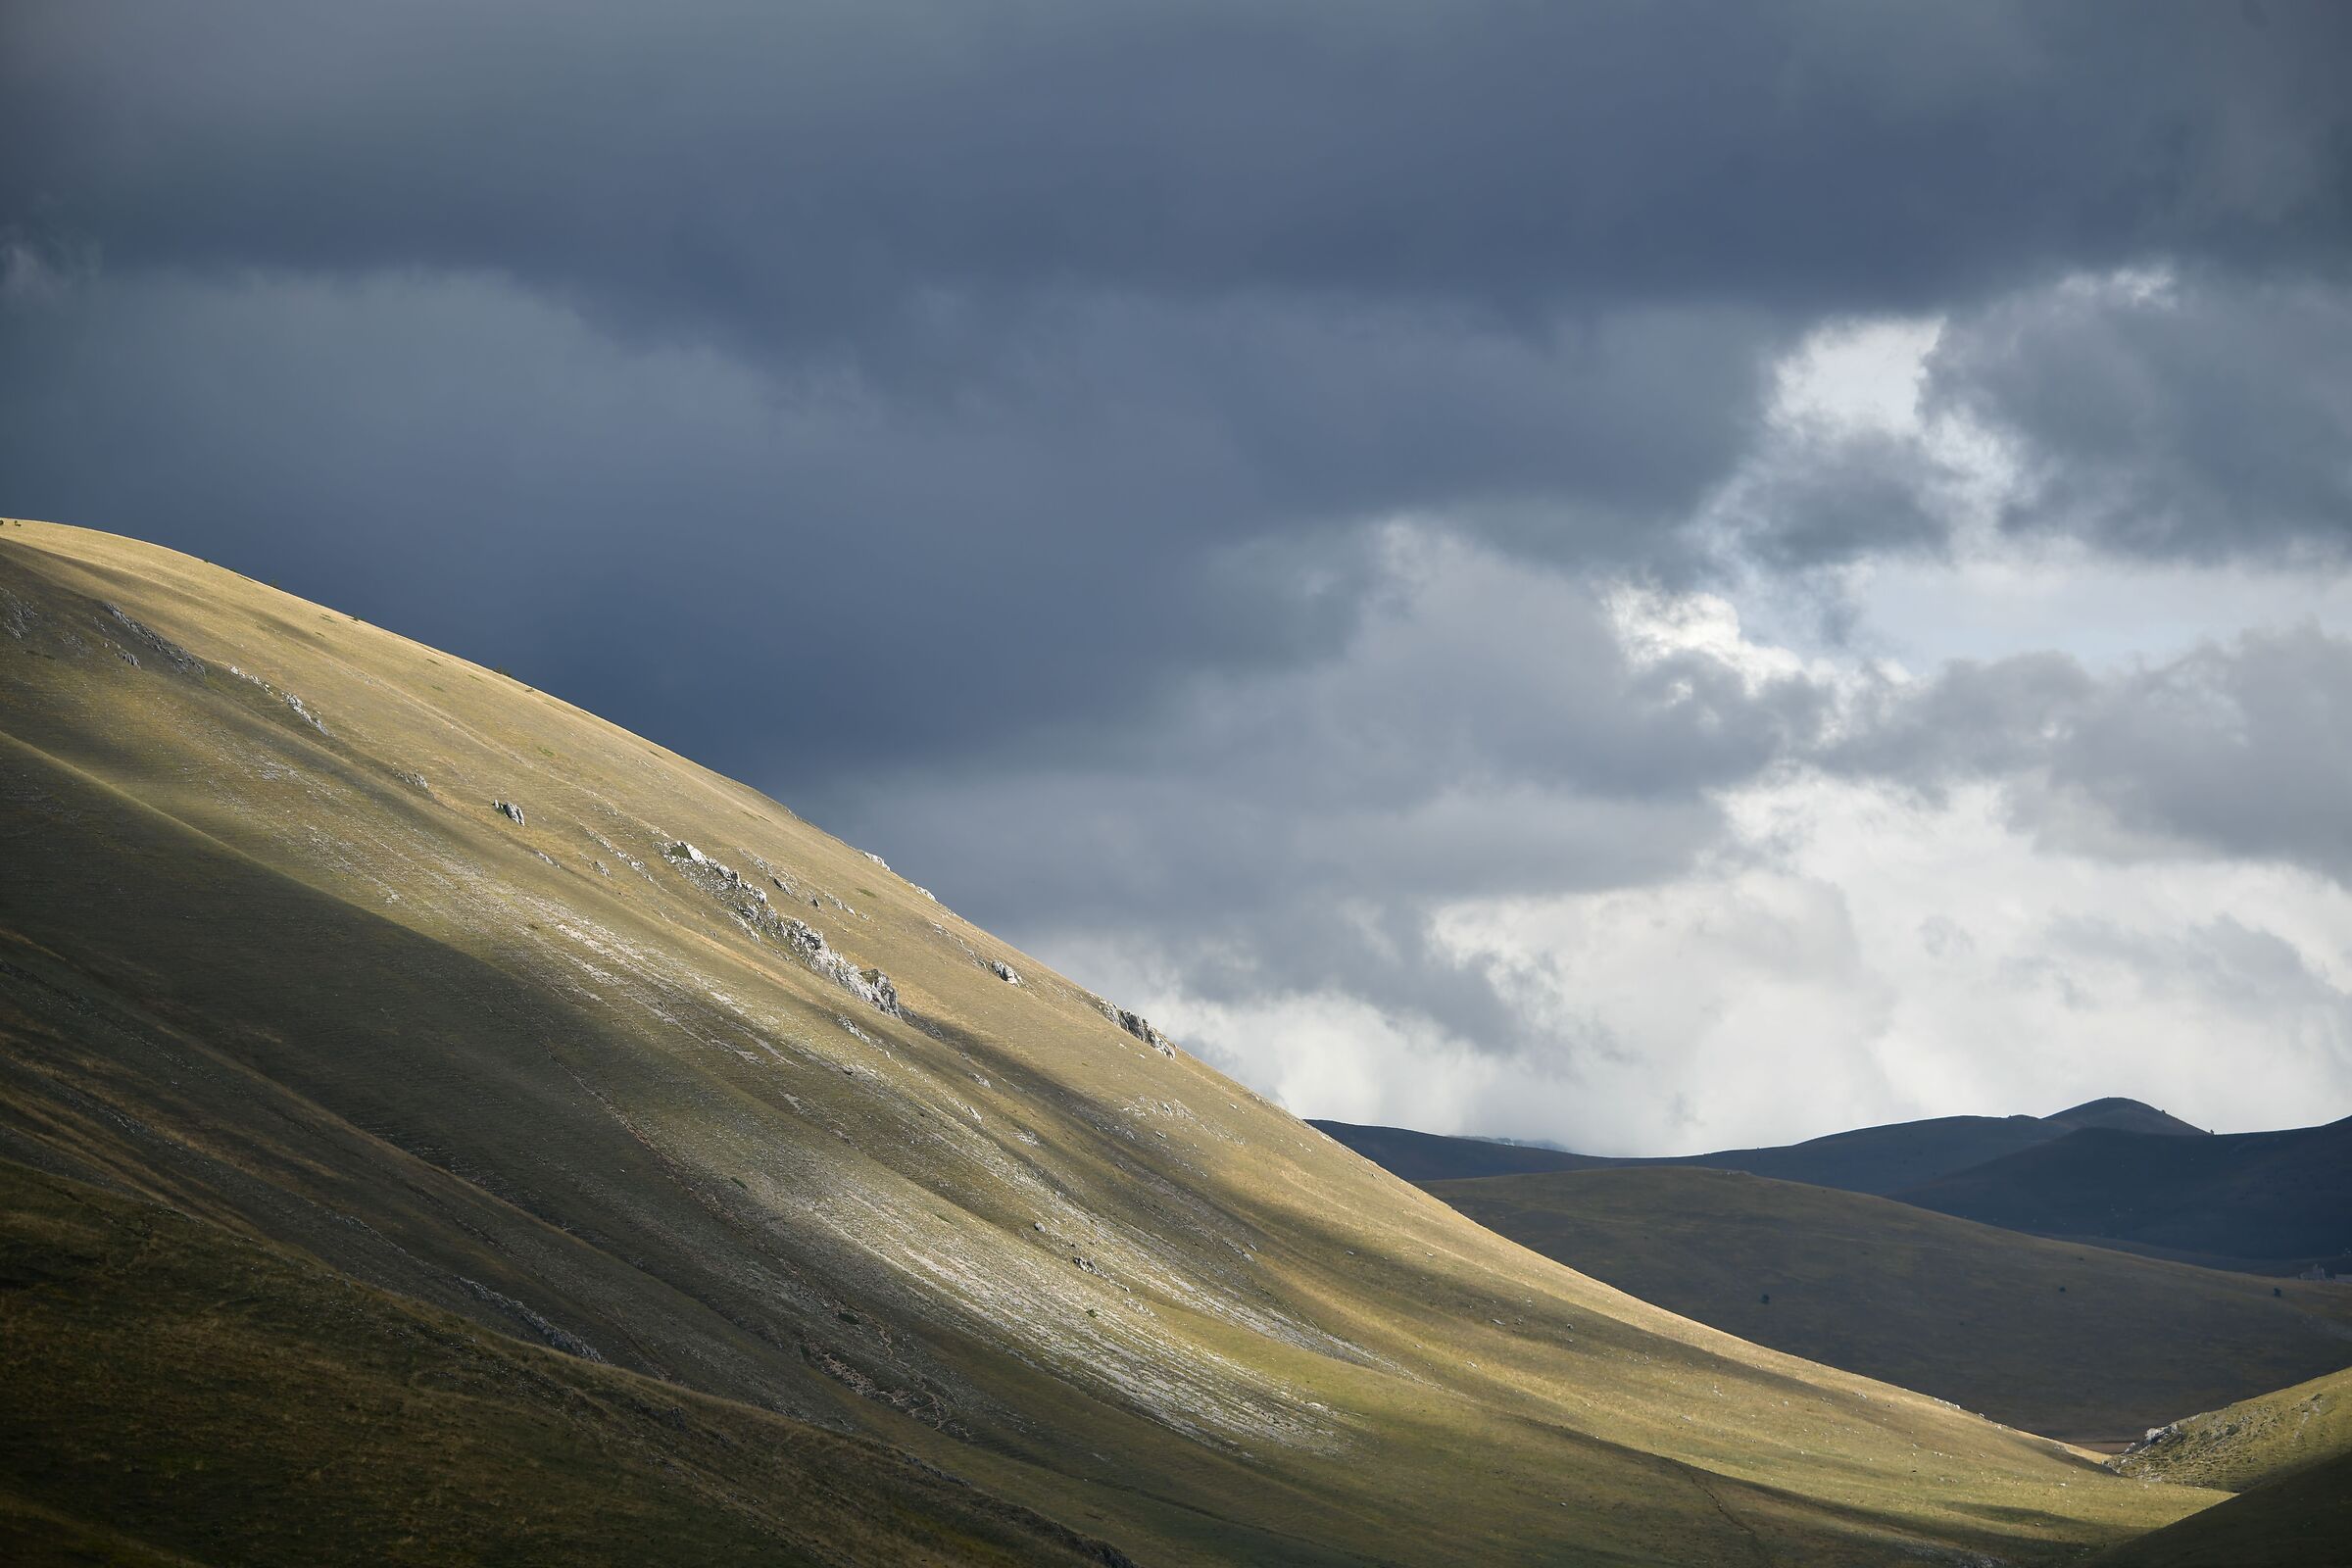 Going up to Campo Imperatore...